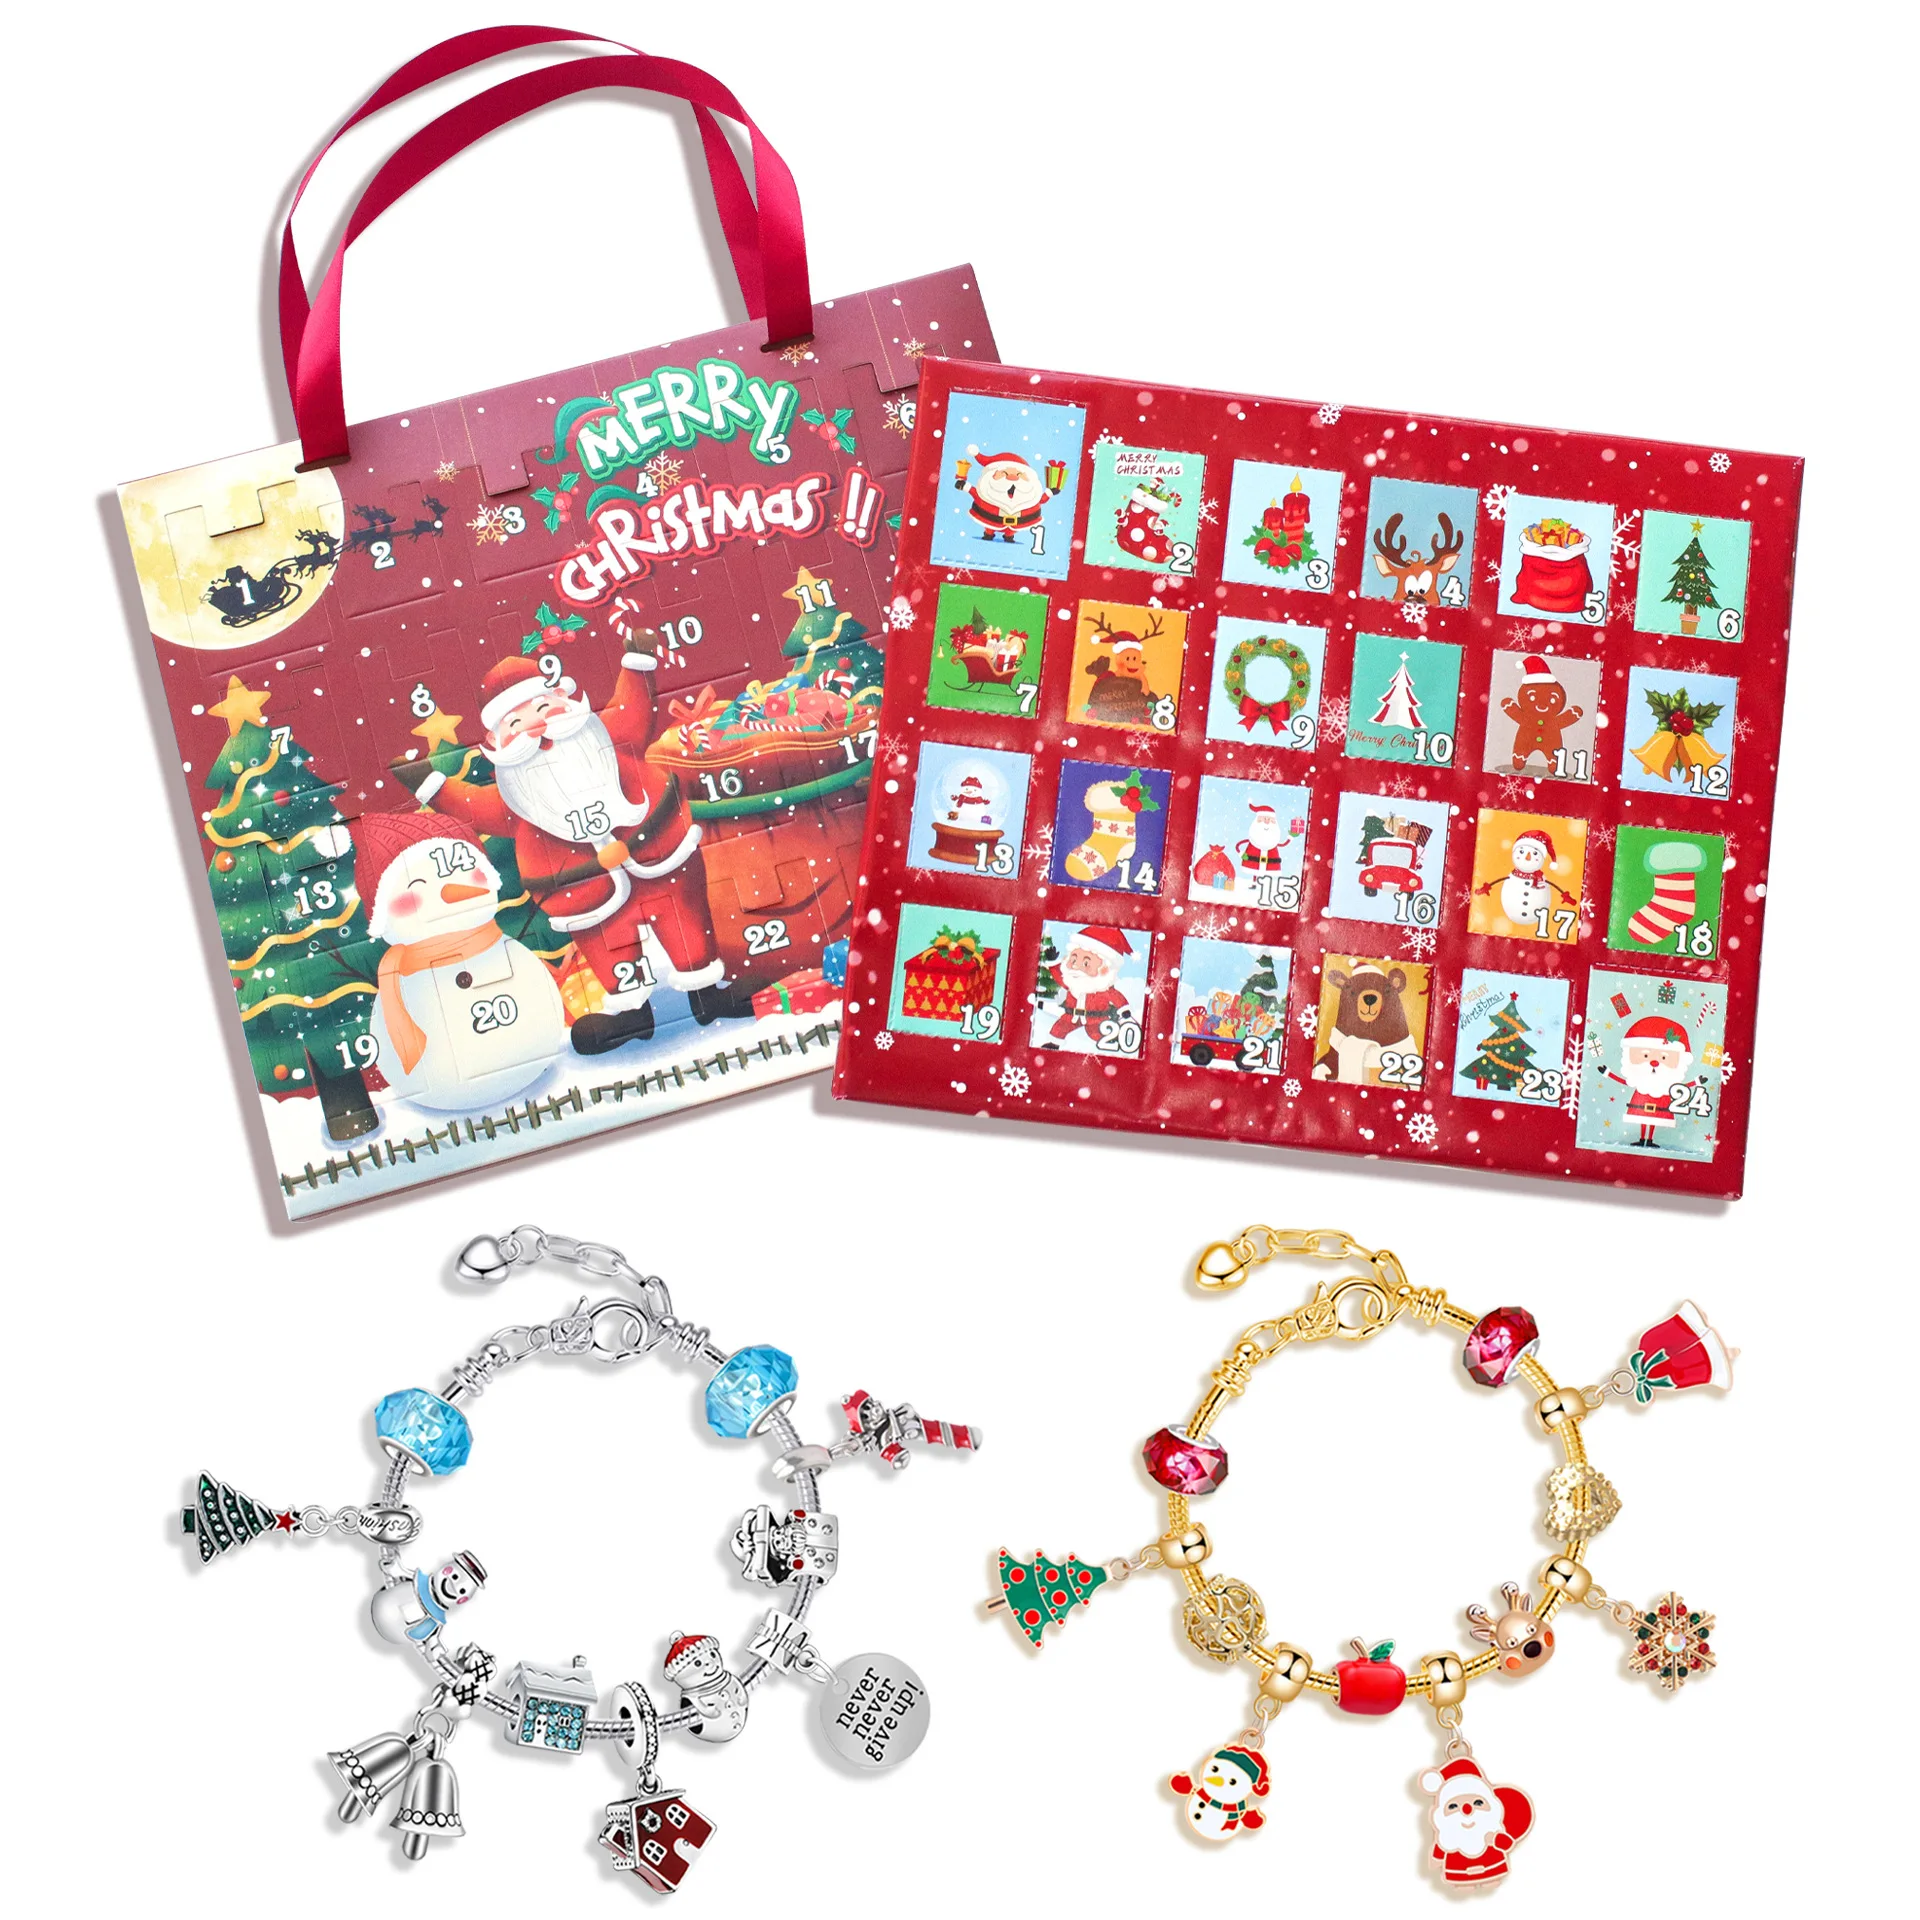 

Christmas Gifts Blind Box for Children Bracelets Sets Christmas Advent Hand-held 24 Grid Jewelry Blind Box Holiday DIY Gift New